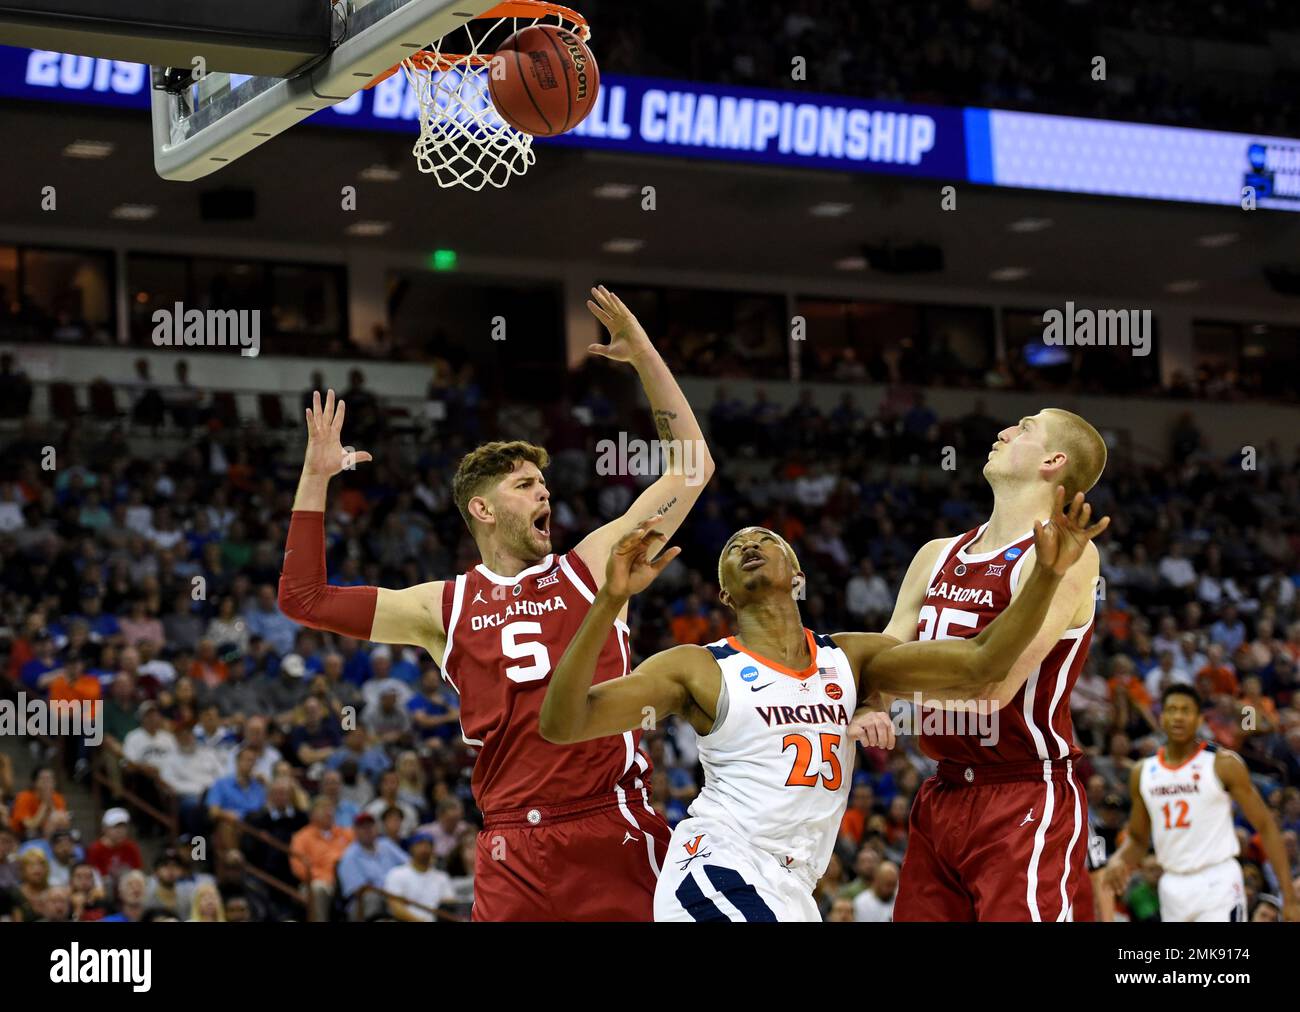 Virginia's Mamadi Diakite (25) after shooting looks for the rebound while  defended by Oklahoma's Matt Freeman (5) and Brady Manek (35) during the  second half of a second round men's college basketball